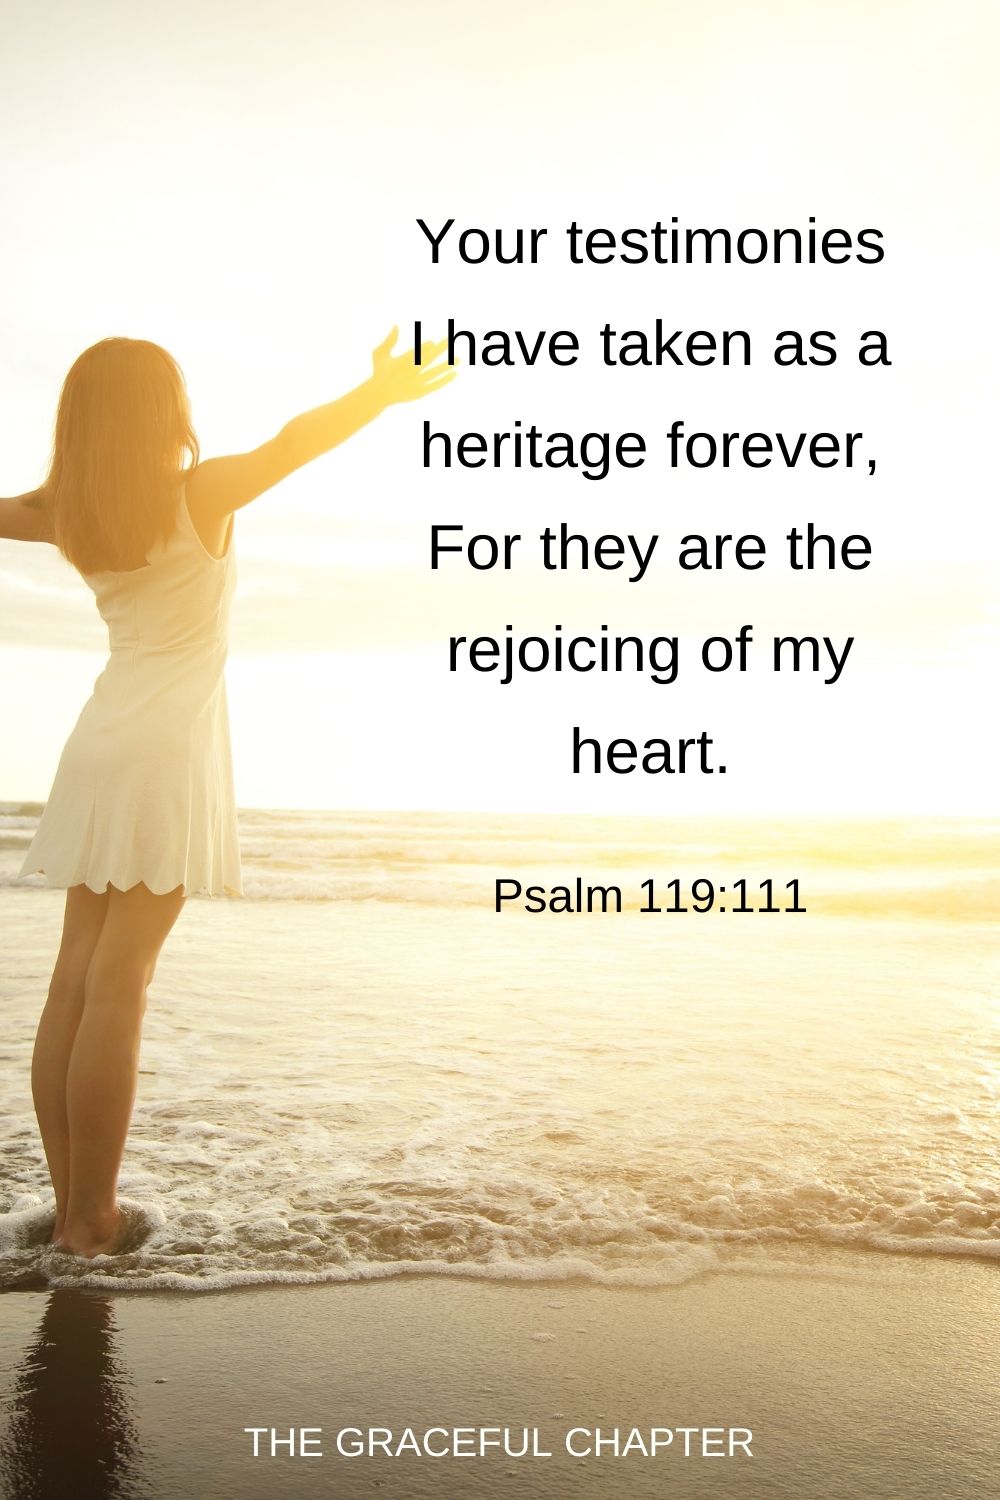 Your testimonies I have taken as a heritage forever, For they are the rejoicing of my heart. Psalm 119:111